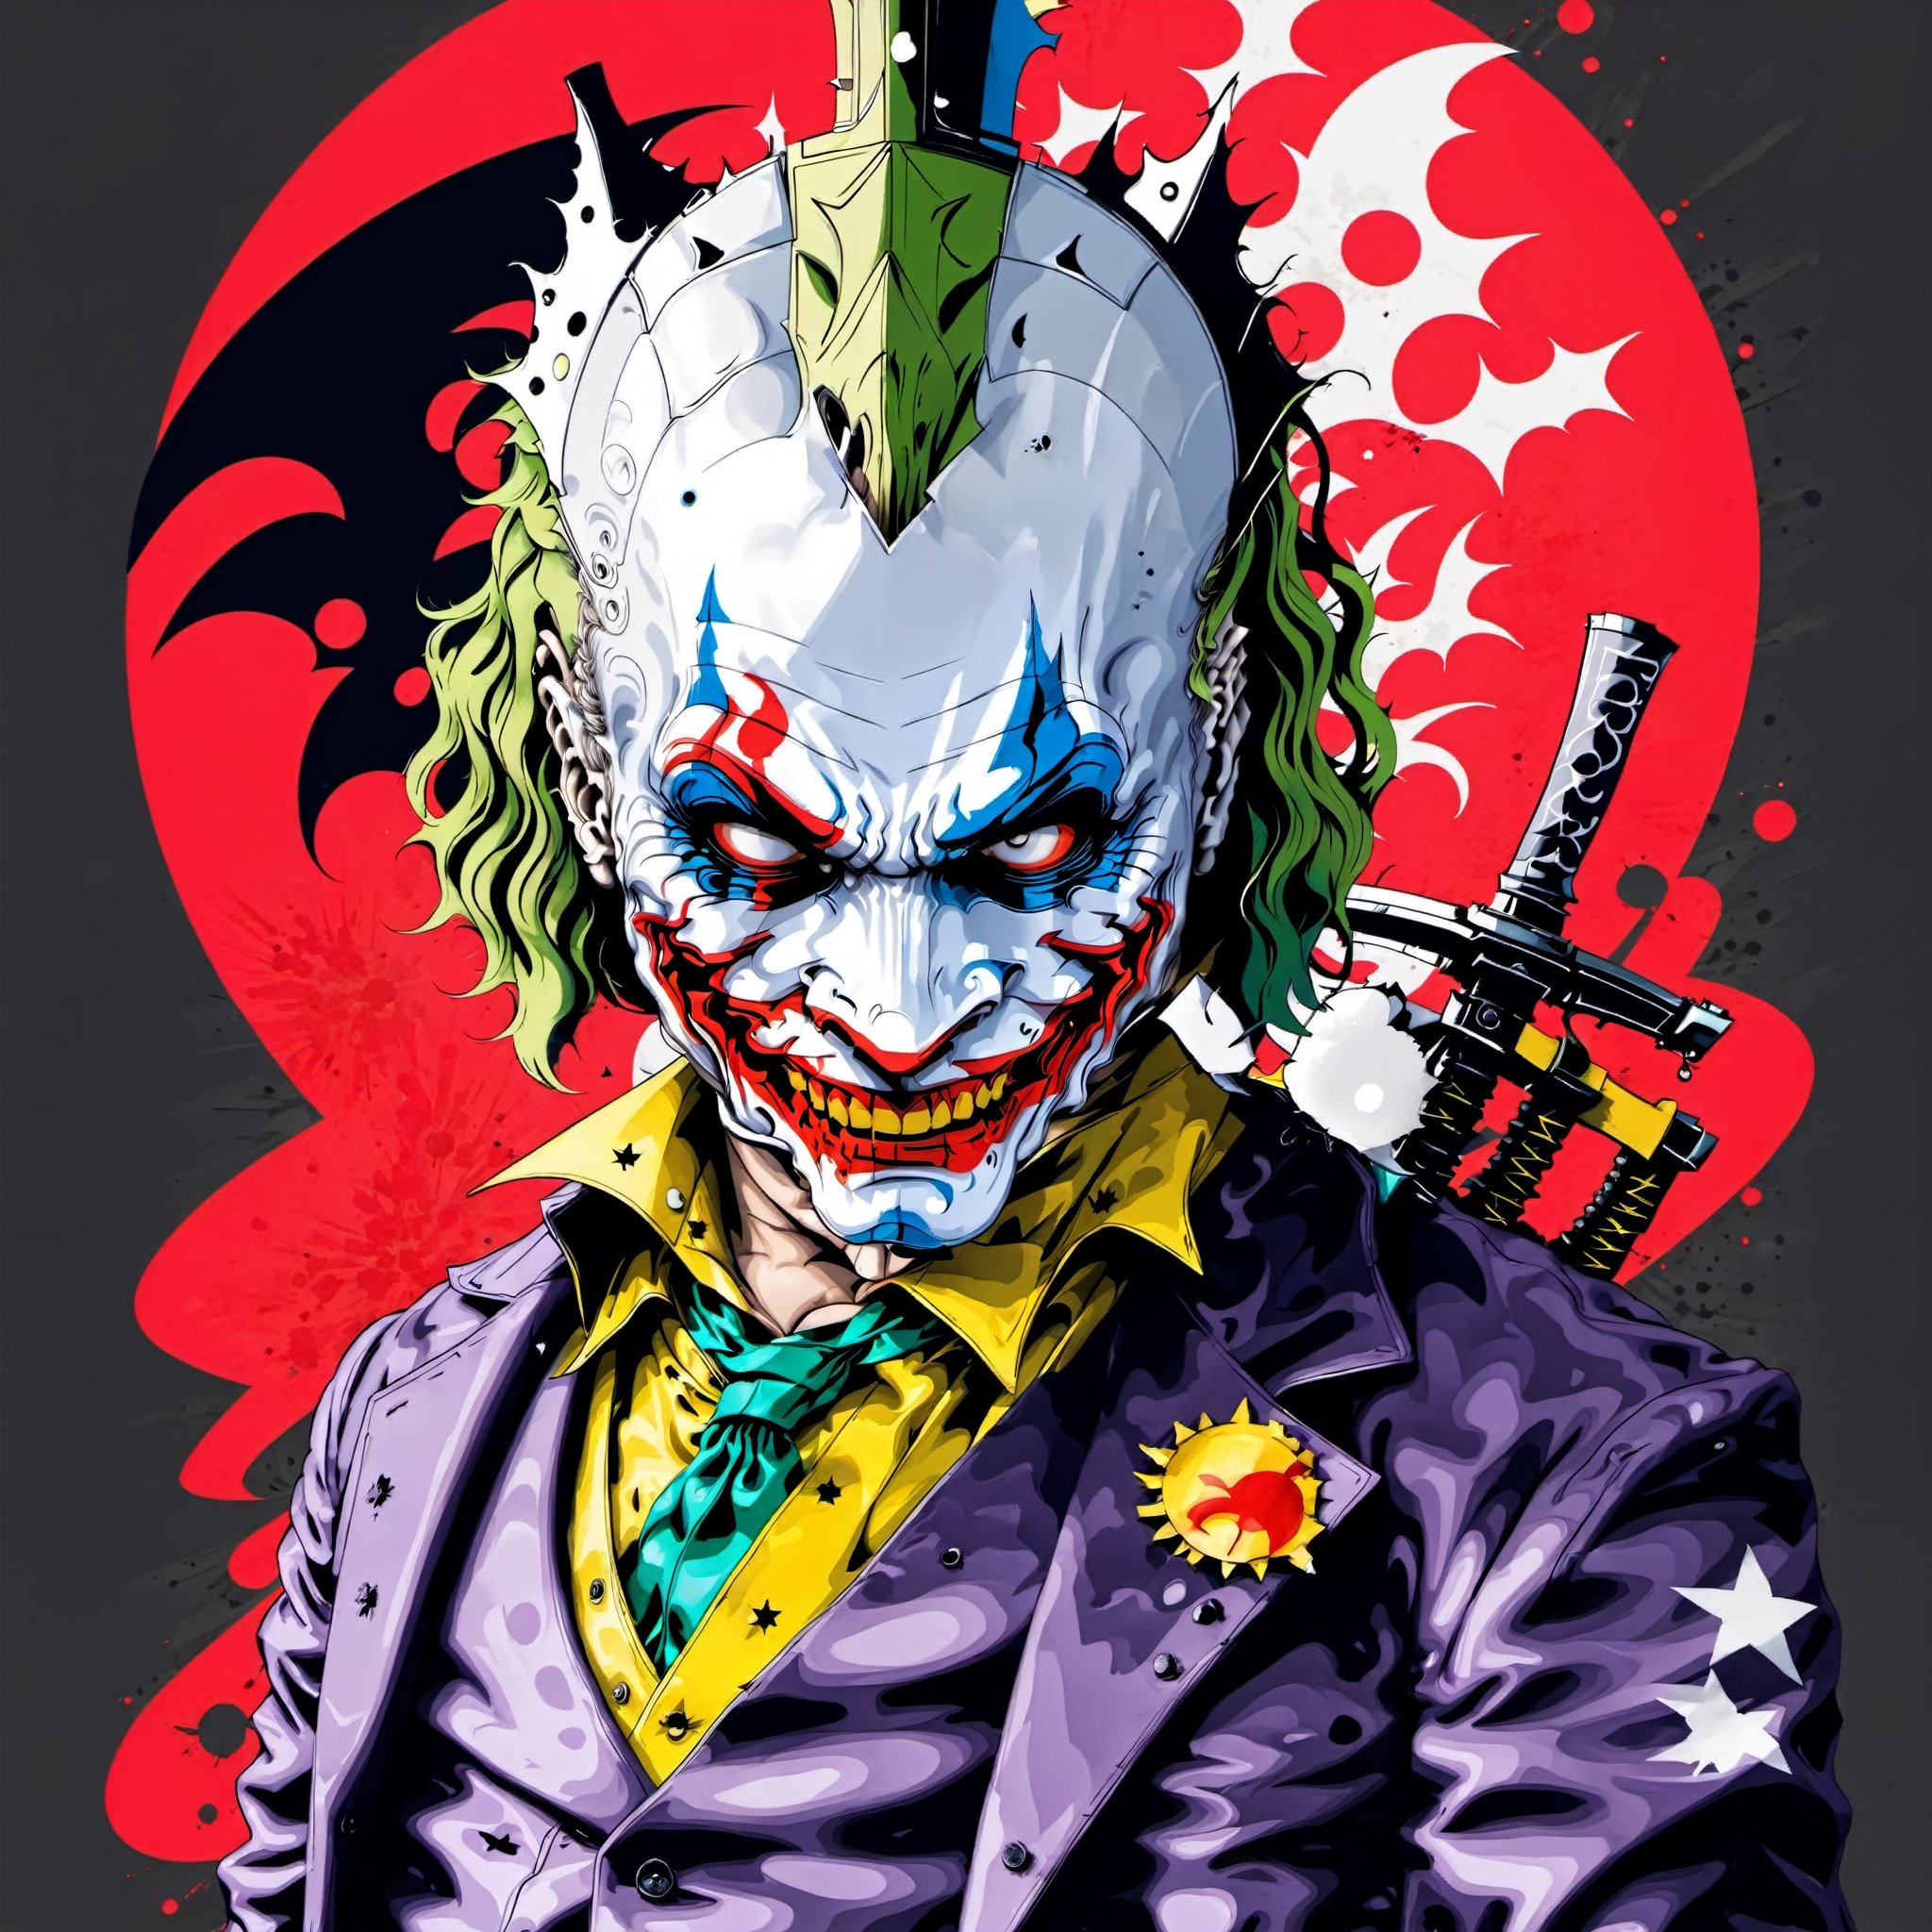 Heath Ledgers Joker character from the Dark Knight trillogy, movie poster, dynamic pose, japanese flag, dynomite, explosions, knives, magician, wonder, cyberpunk style anime characters, sexy samurai lady, skull mask, AK-47 quote "Why So Serious!?!"